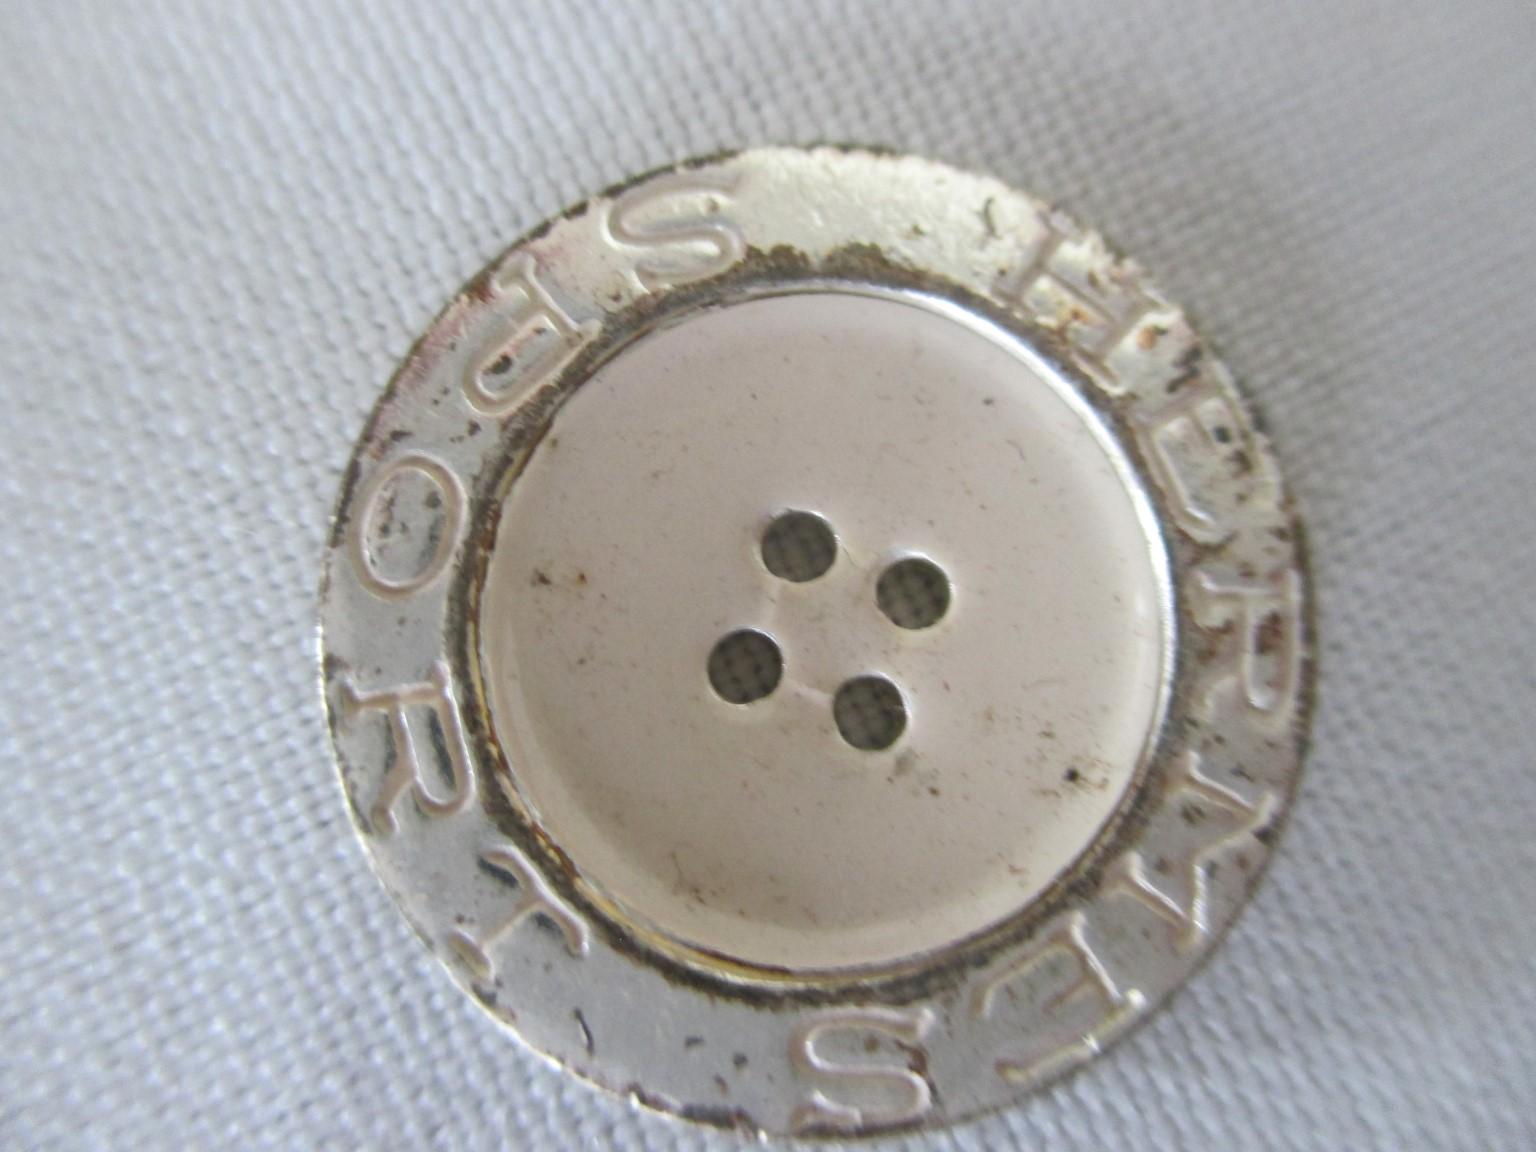 Hermes Sport vintage silver tone buttons, old stock.
Size 2 cm/ inch 0.78
19 pieces
Condition : Vintage with some wear (see photos) 

Please note that vintage items are not new and therefore might have minor imperfections